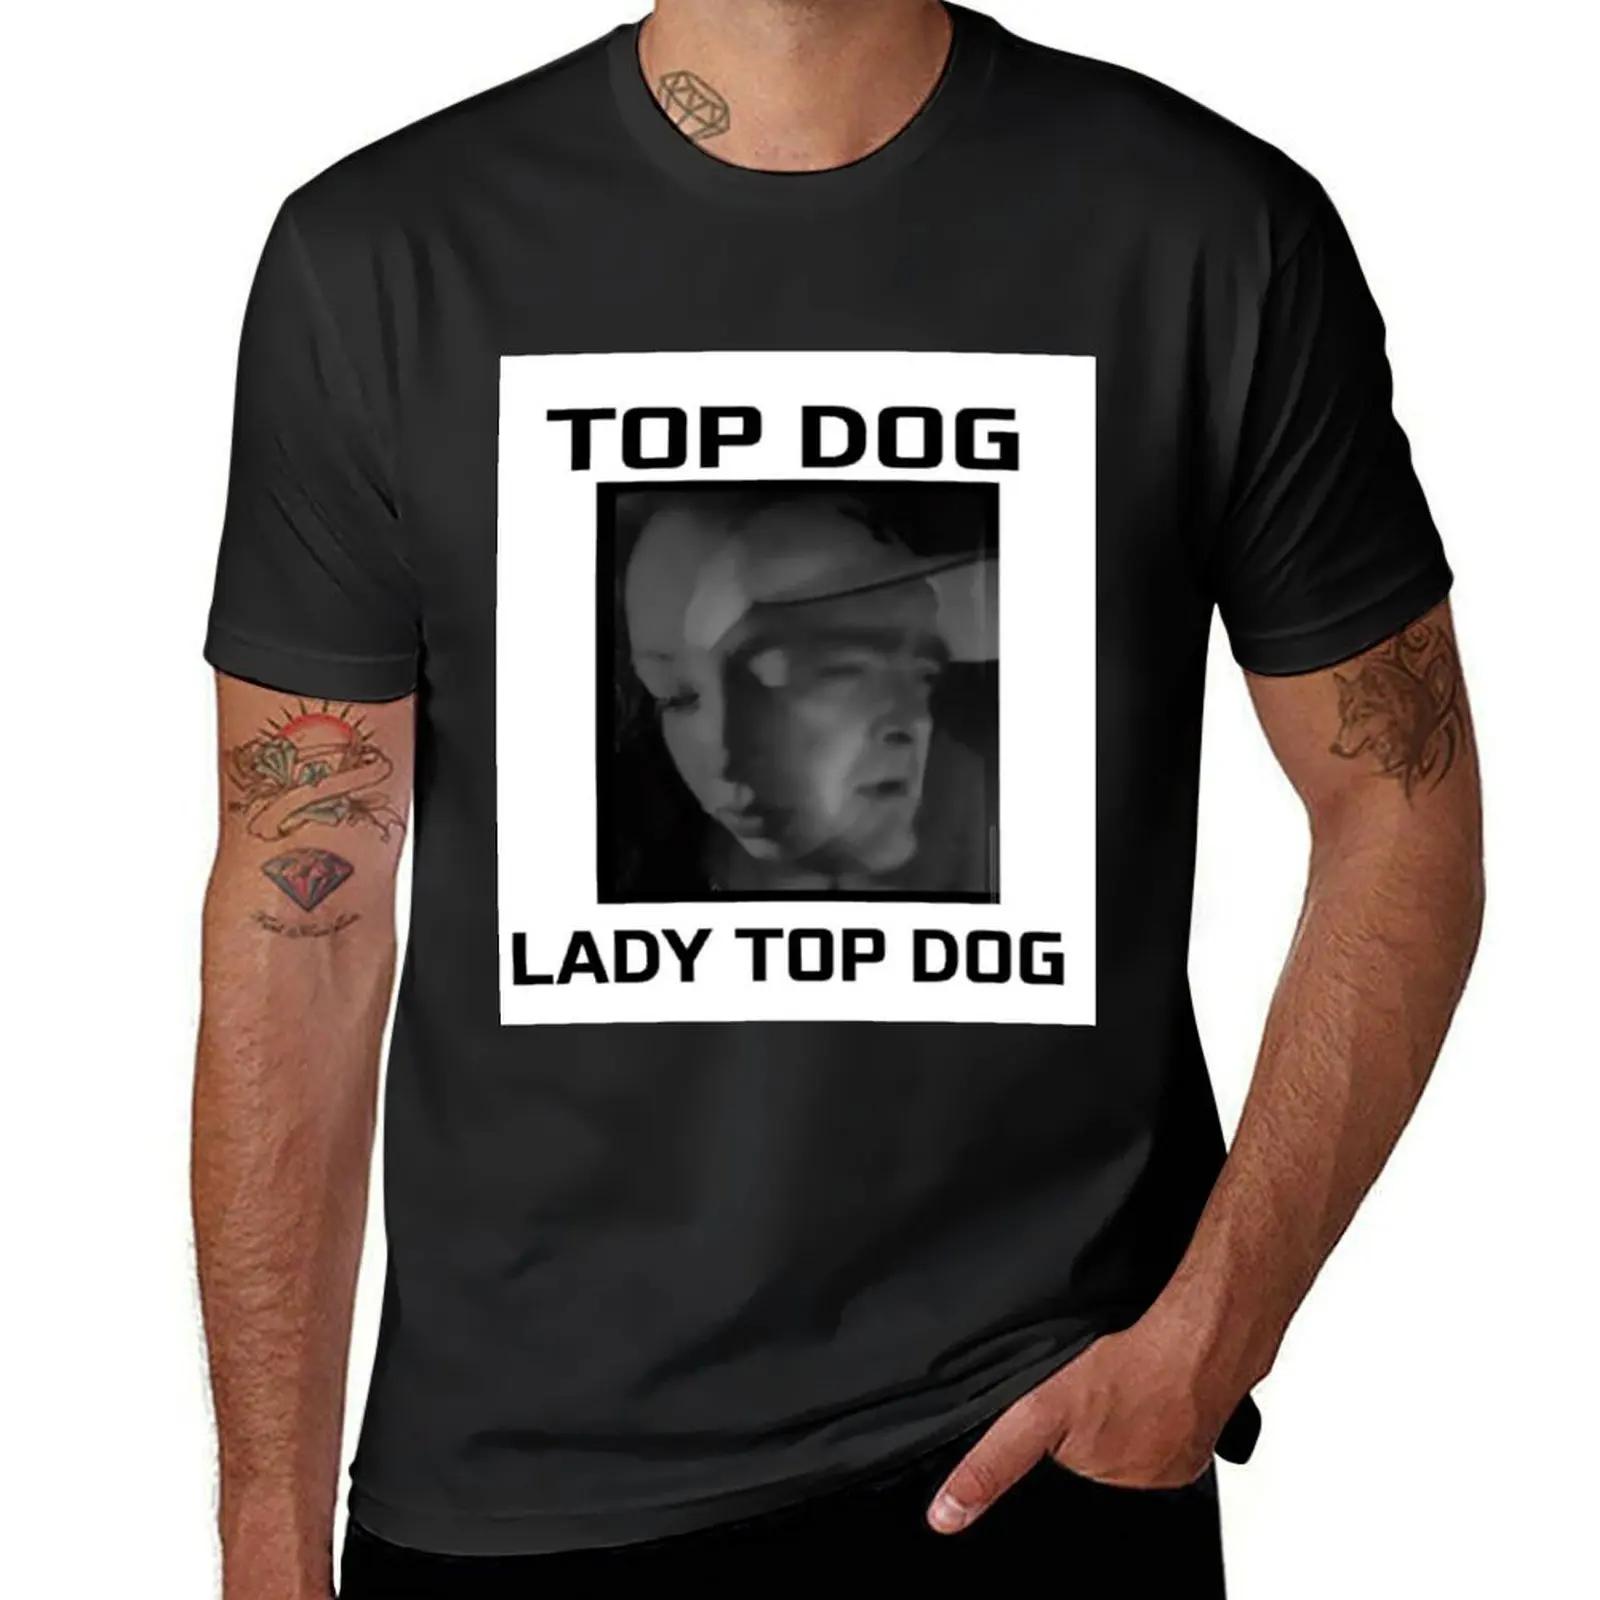 Lady Top Dog and Top Dog Limited Edition Ƽ, ִ ѱ м, Ϳ ,  Ϲ Ƽ